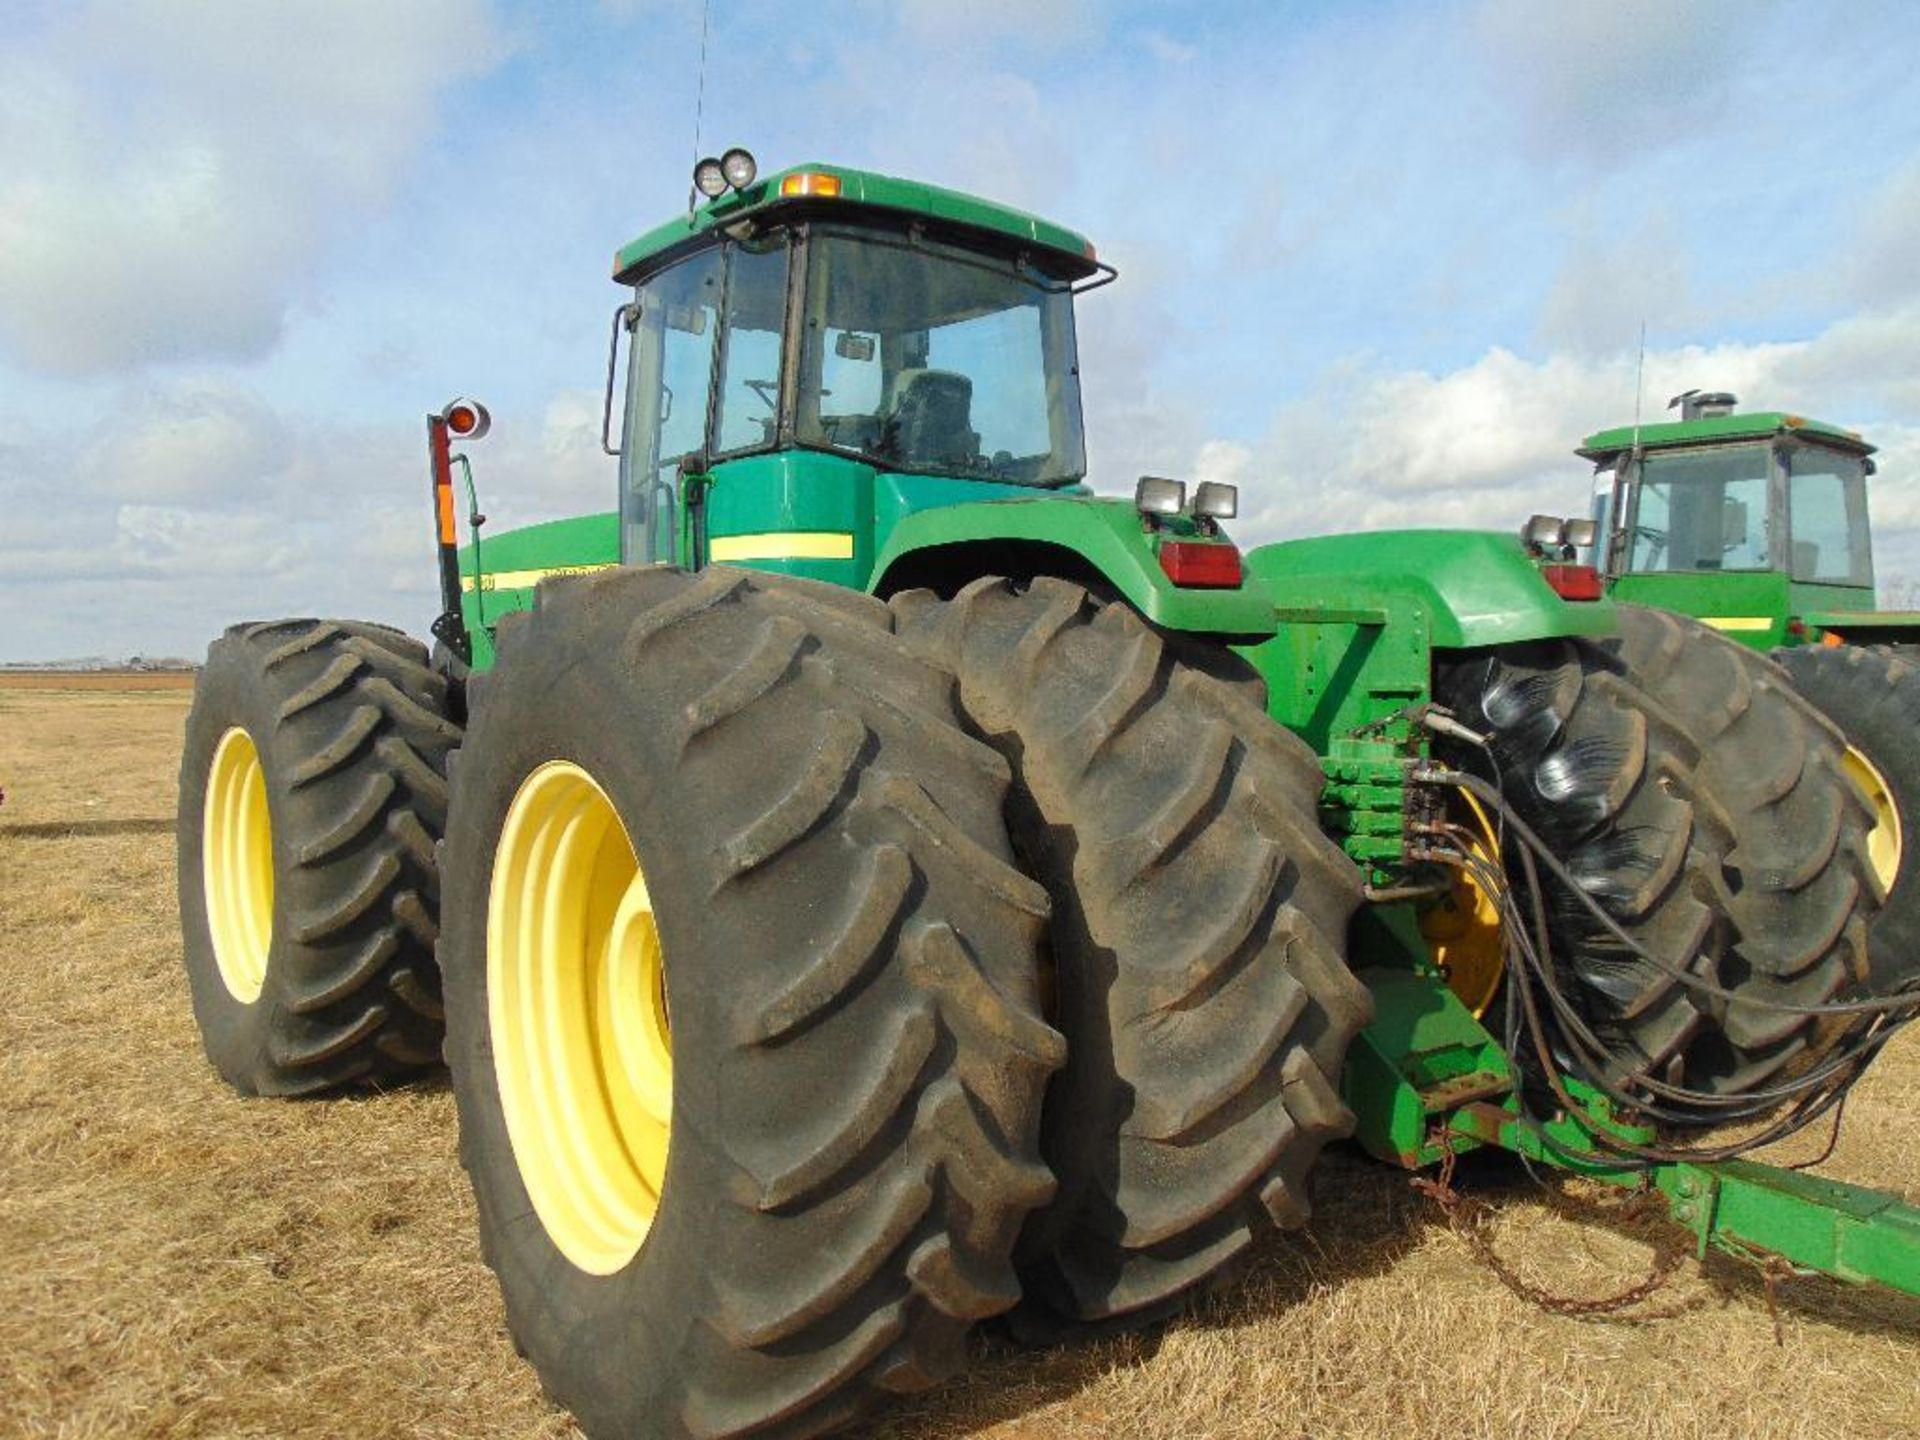 John Deere 9400 4x4 Farm Tractor, s/m p030793, cab, a/c, 4 hyd, duals, hour meter reads 4748 hrs, - Image 10 of 10